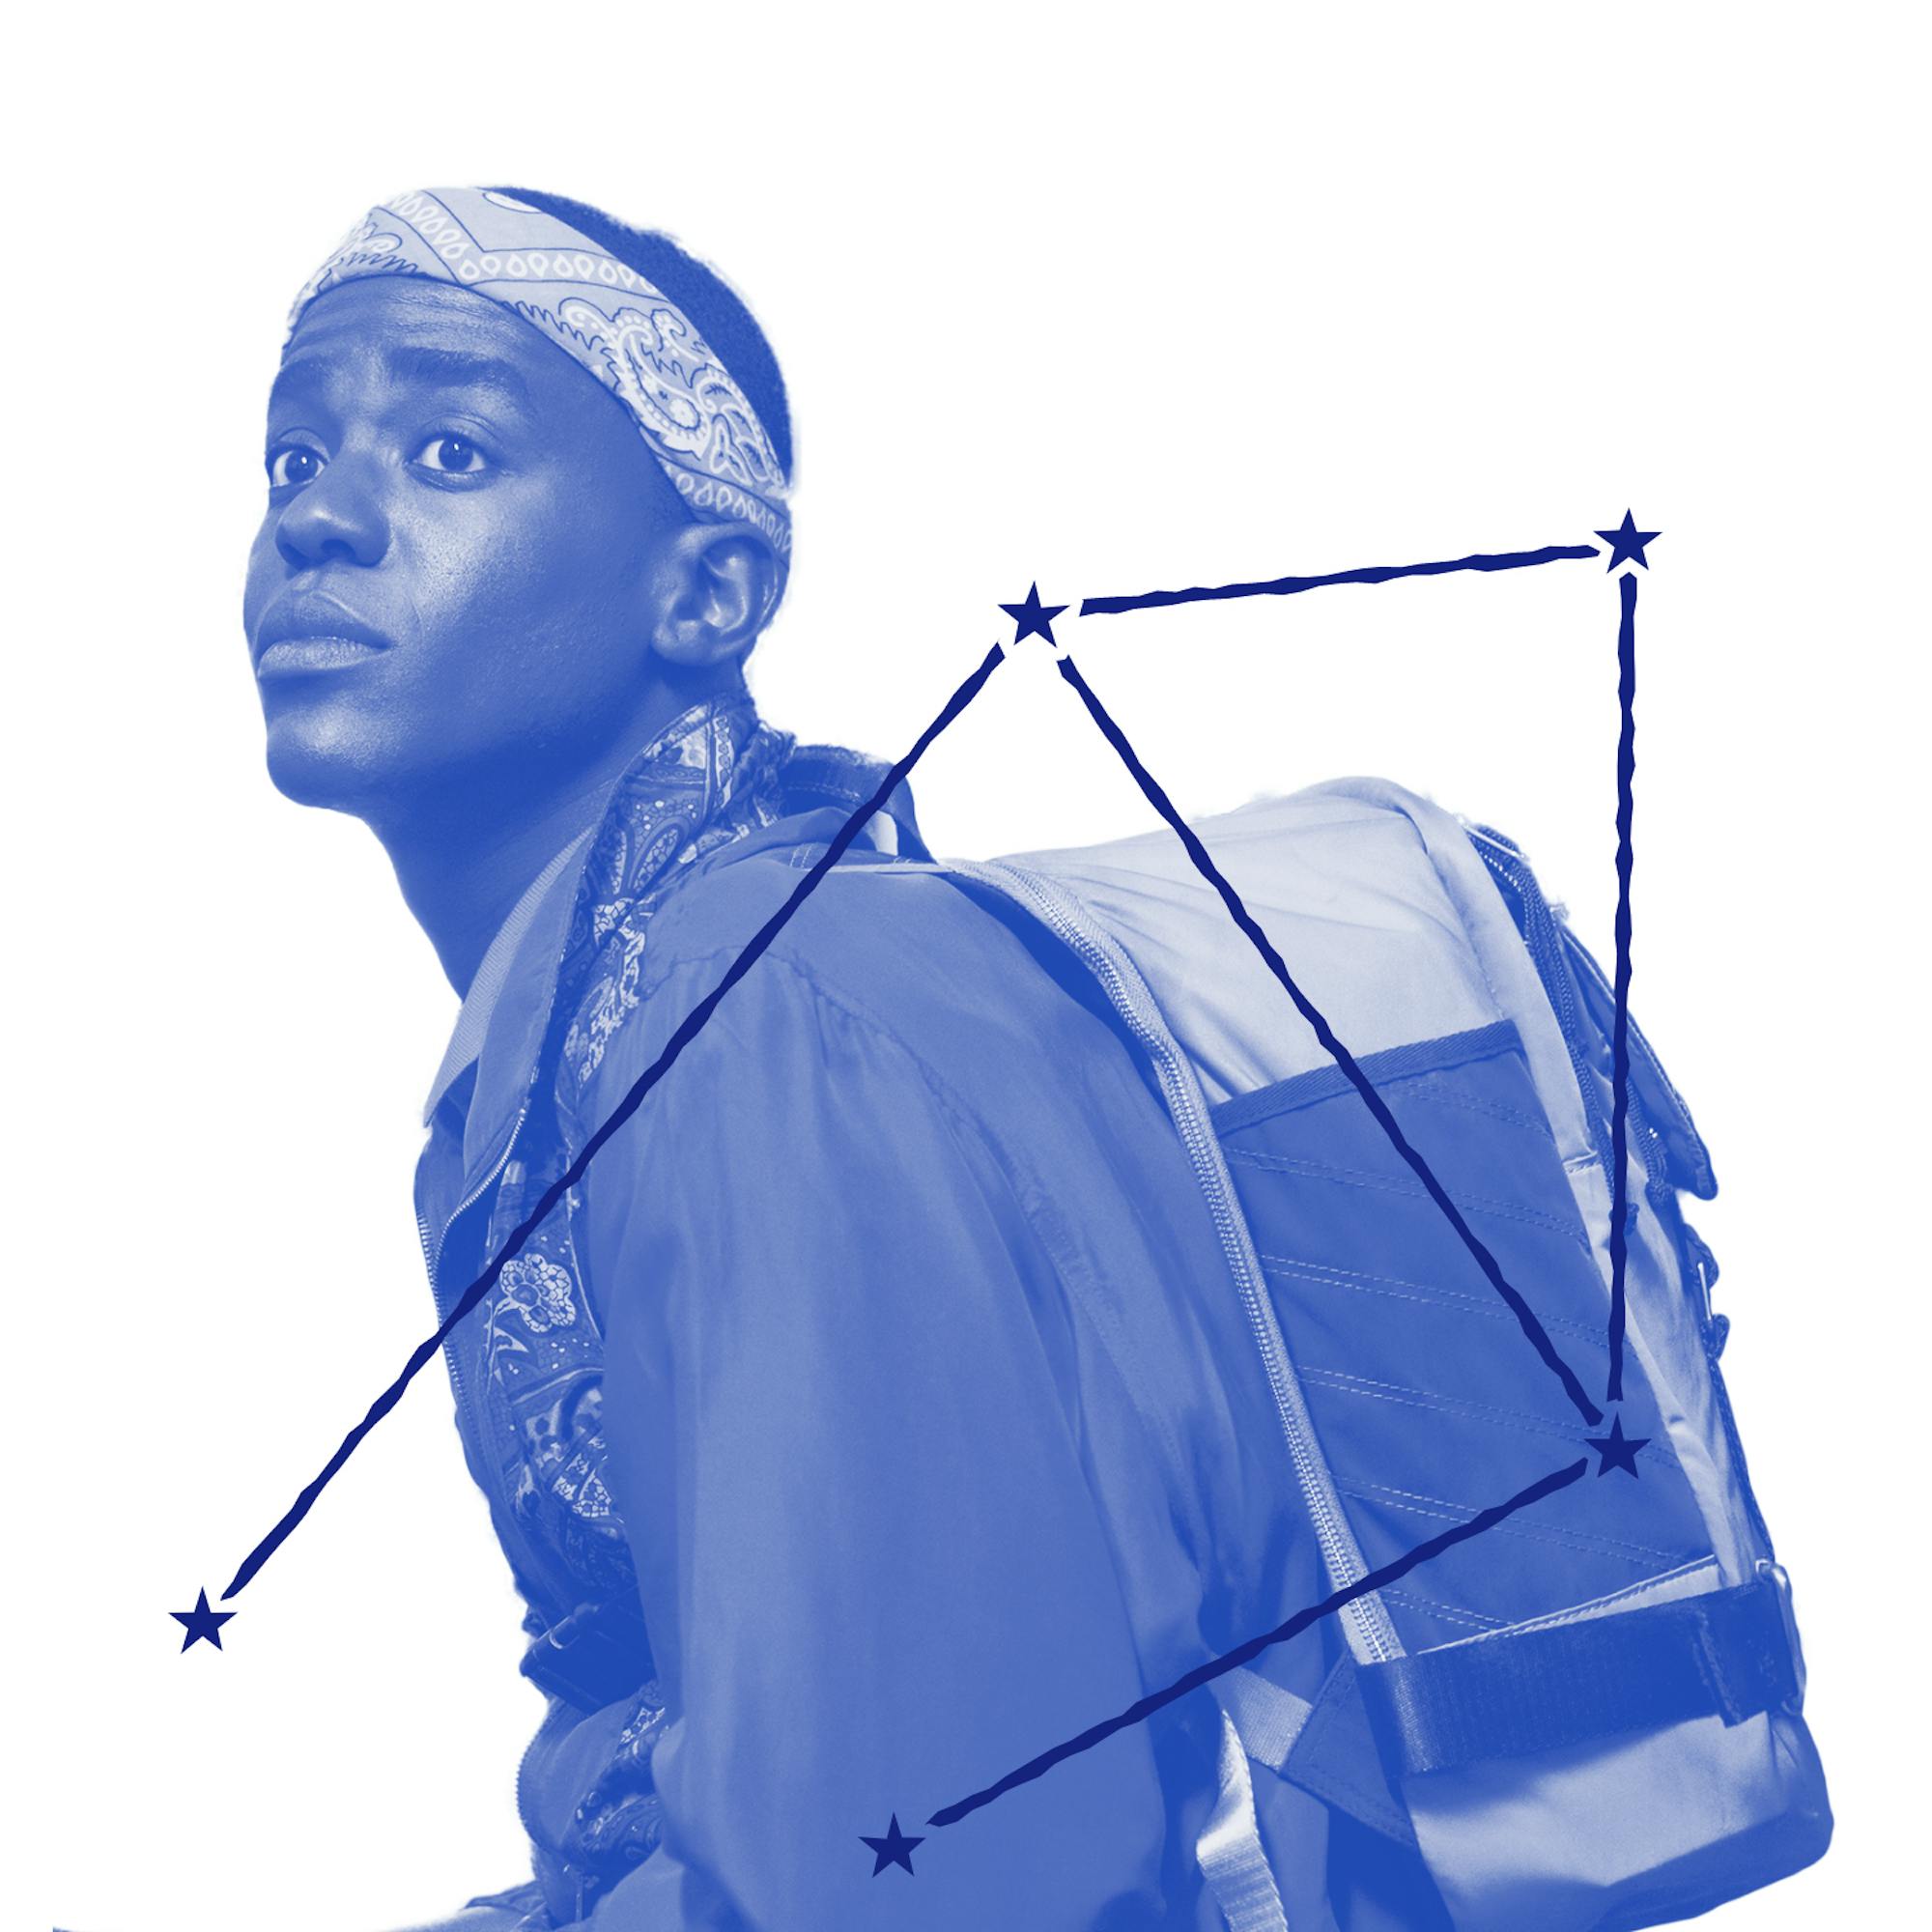  Eric Effiong (played by Ncuti Gatwa) is fabulous in a paisley bandana in this still from Sex Education. Only Eric can make a school backpack into a fashion statement. Over the image is an illustration of Eric’s zodiac constellation.